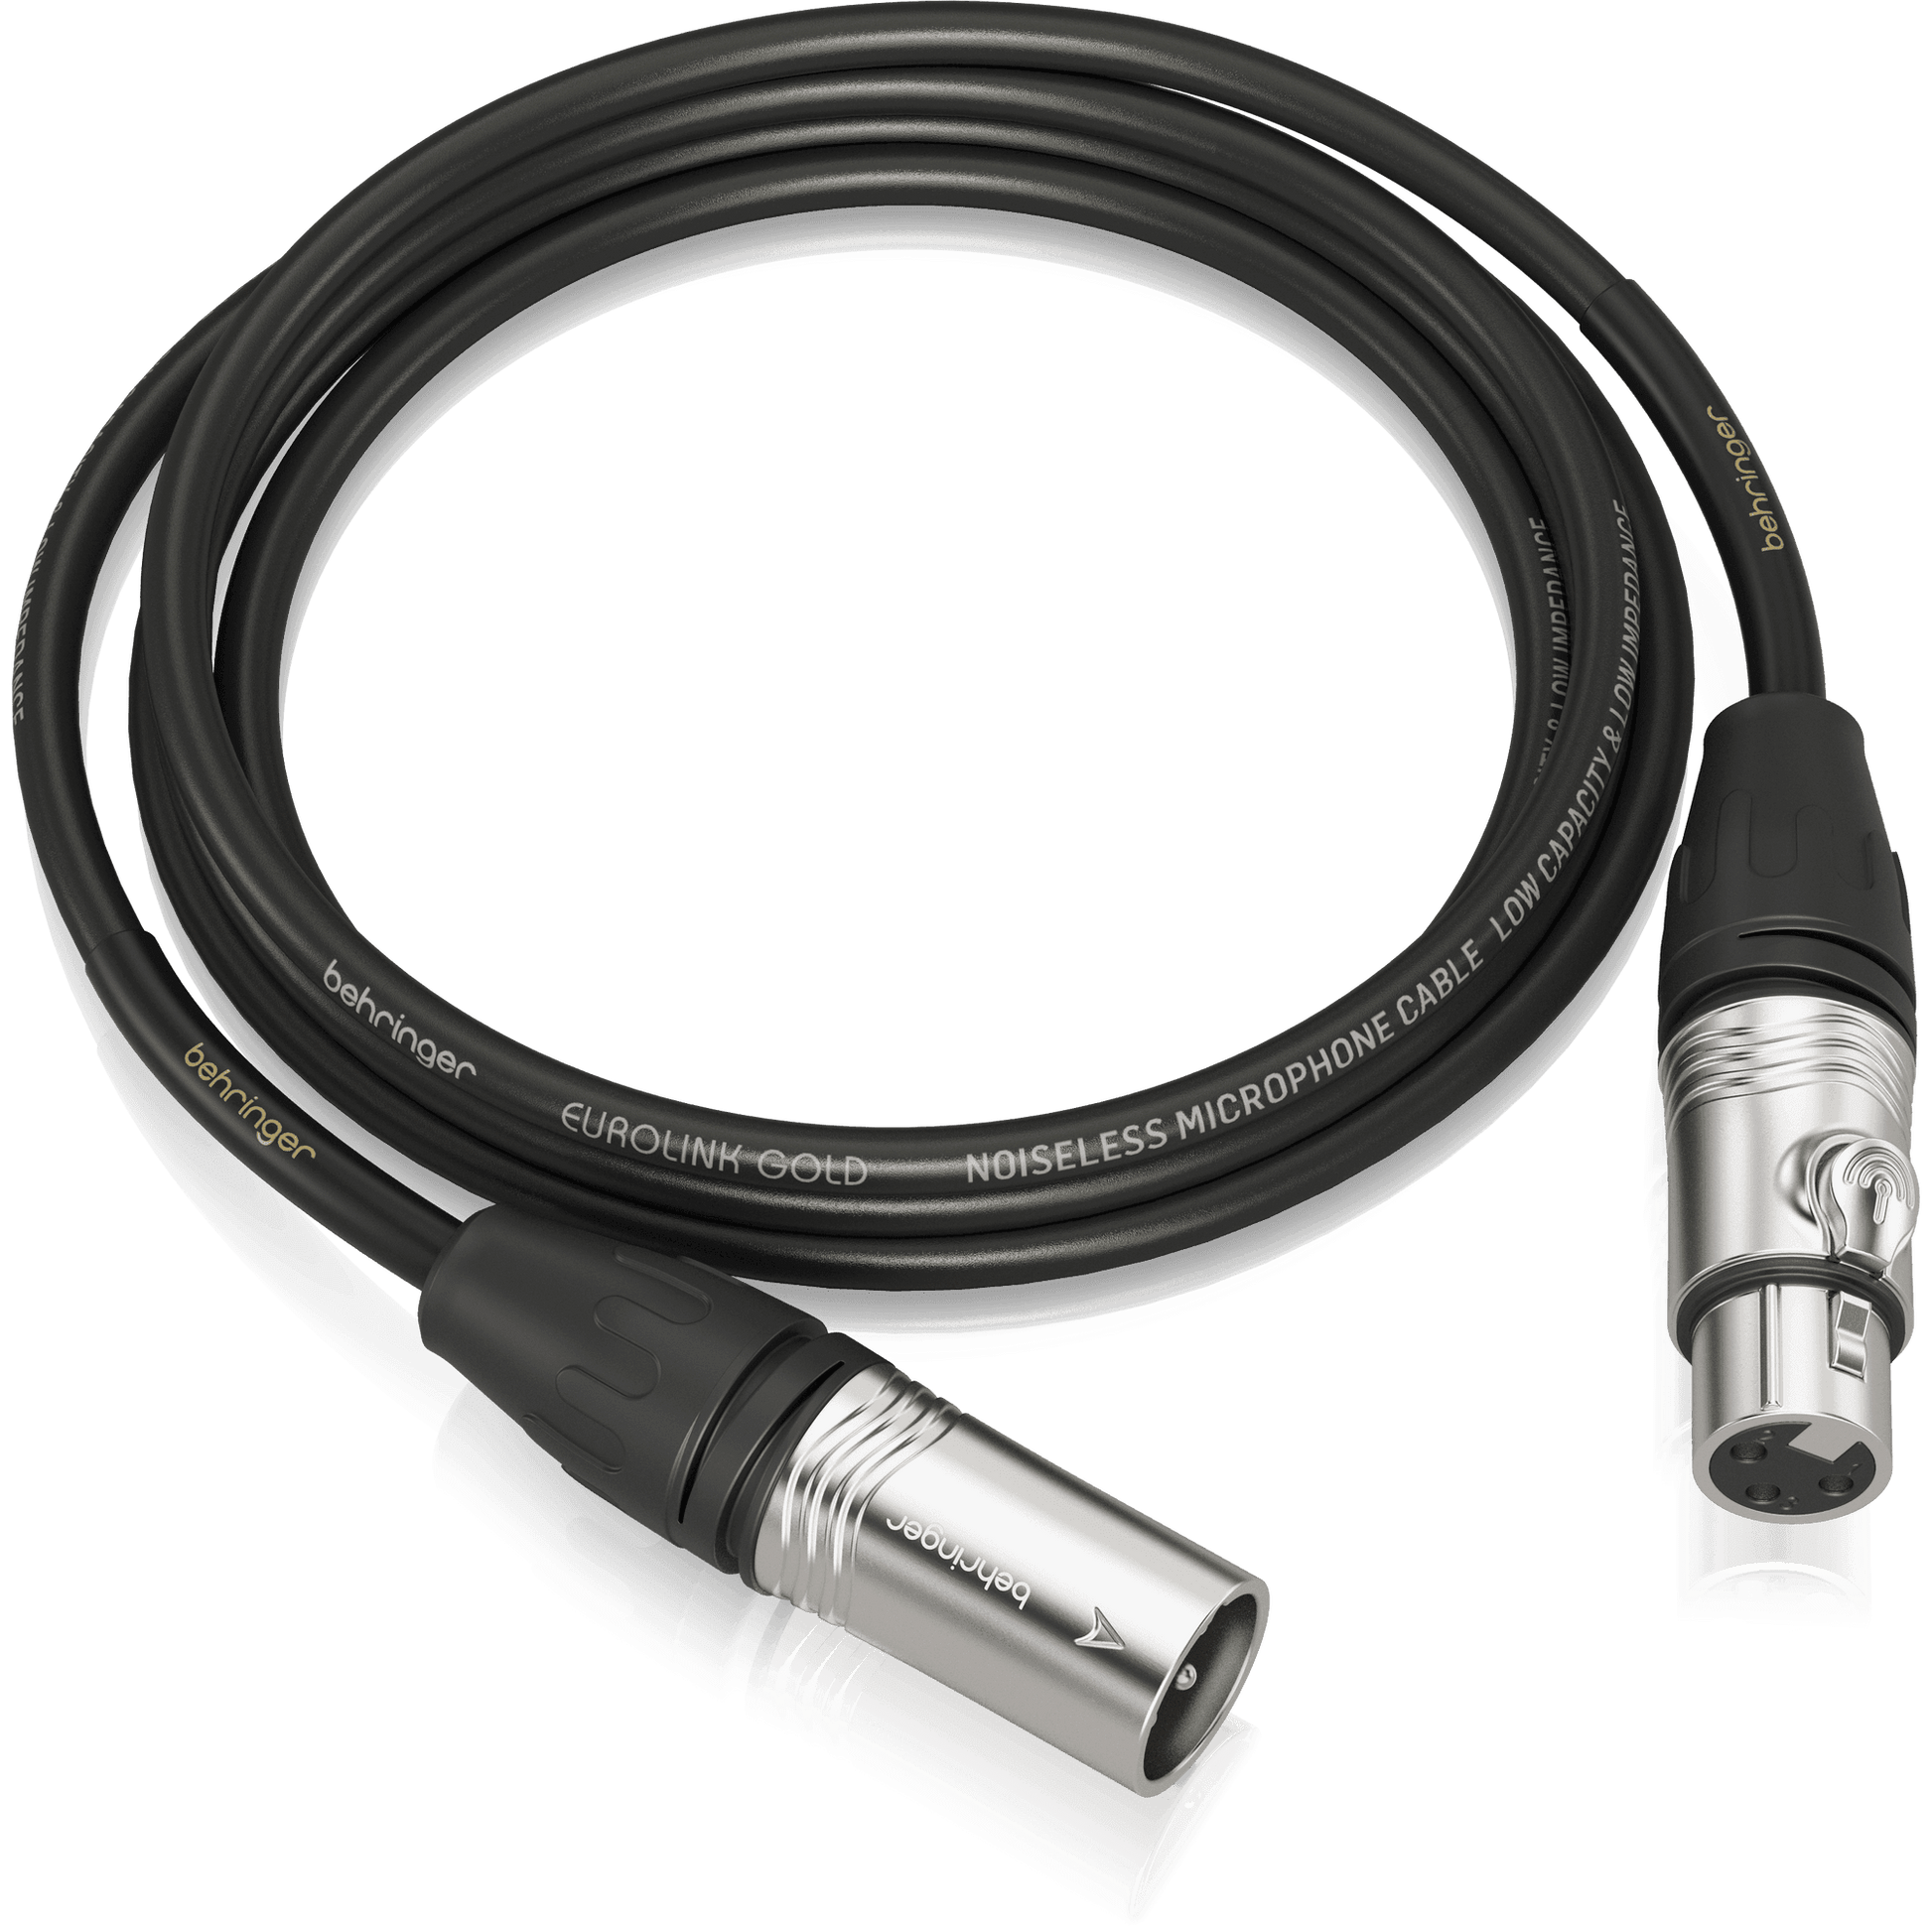 Behringer GMC Microphone Cable with XLR Connectors